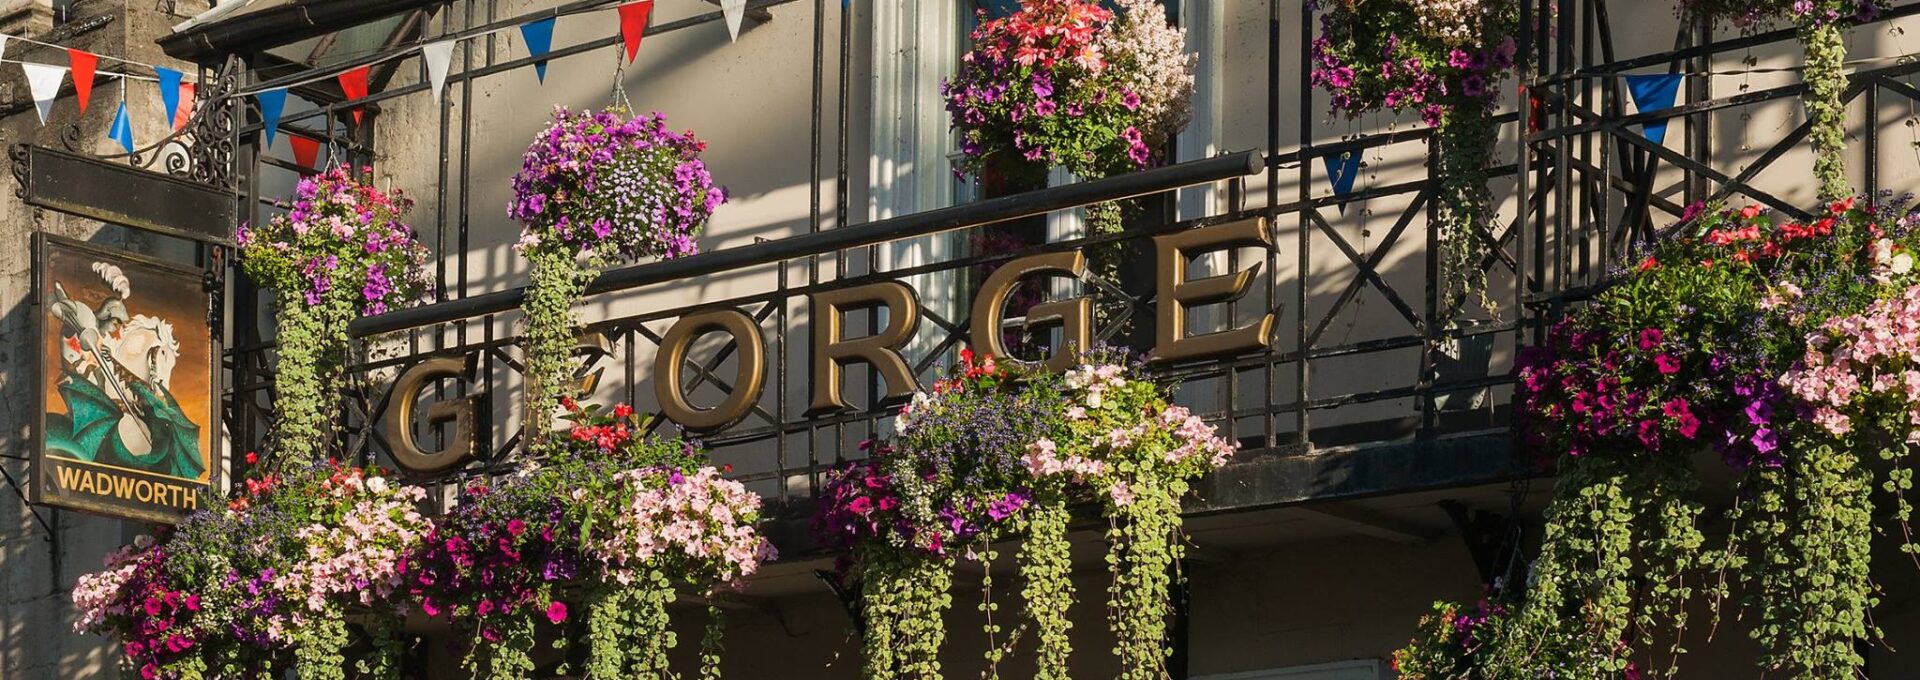 George Hotel - Frome in Bloom